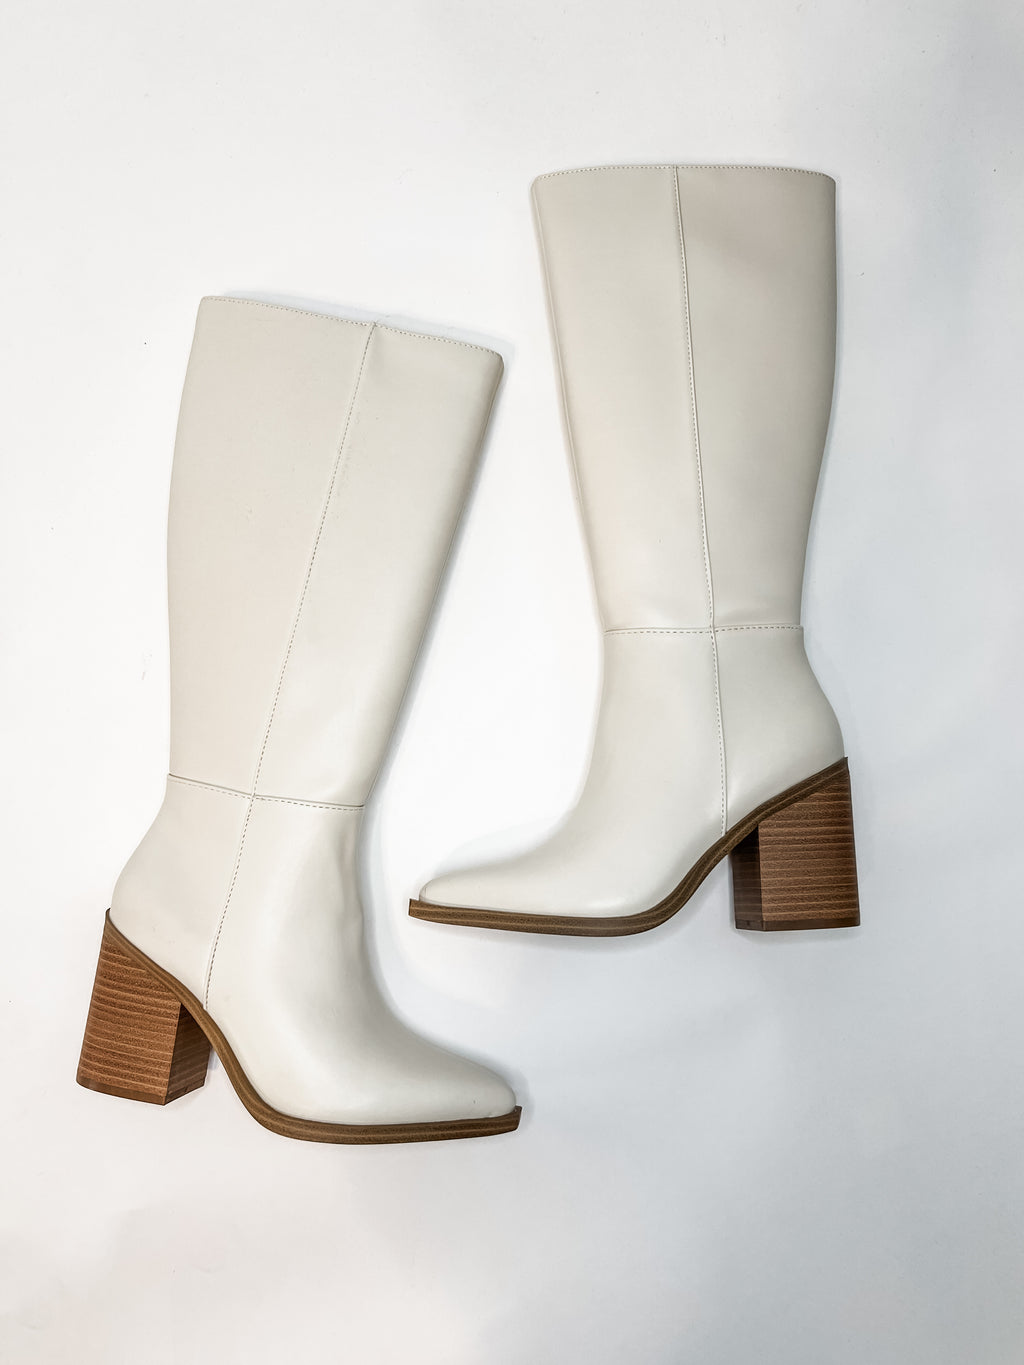 The Sloan Boot